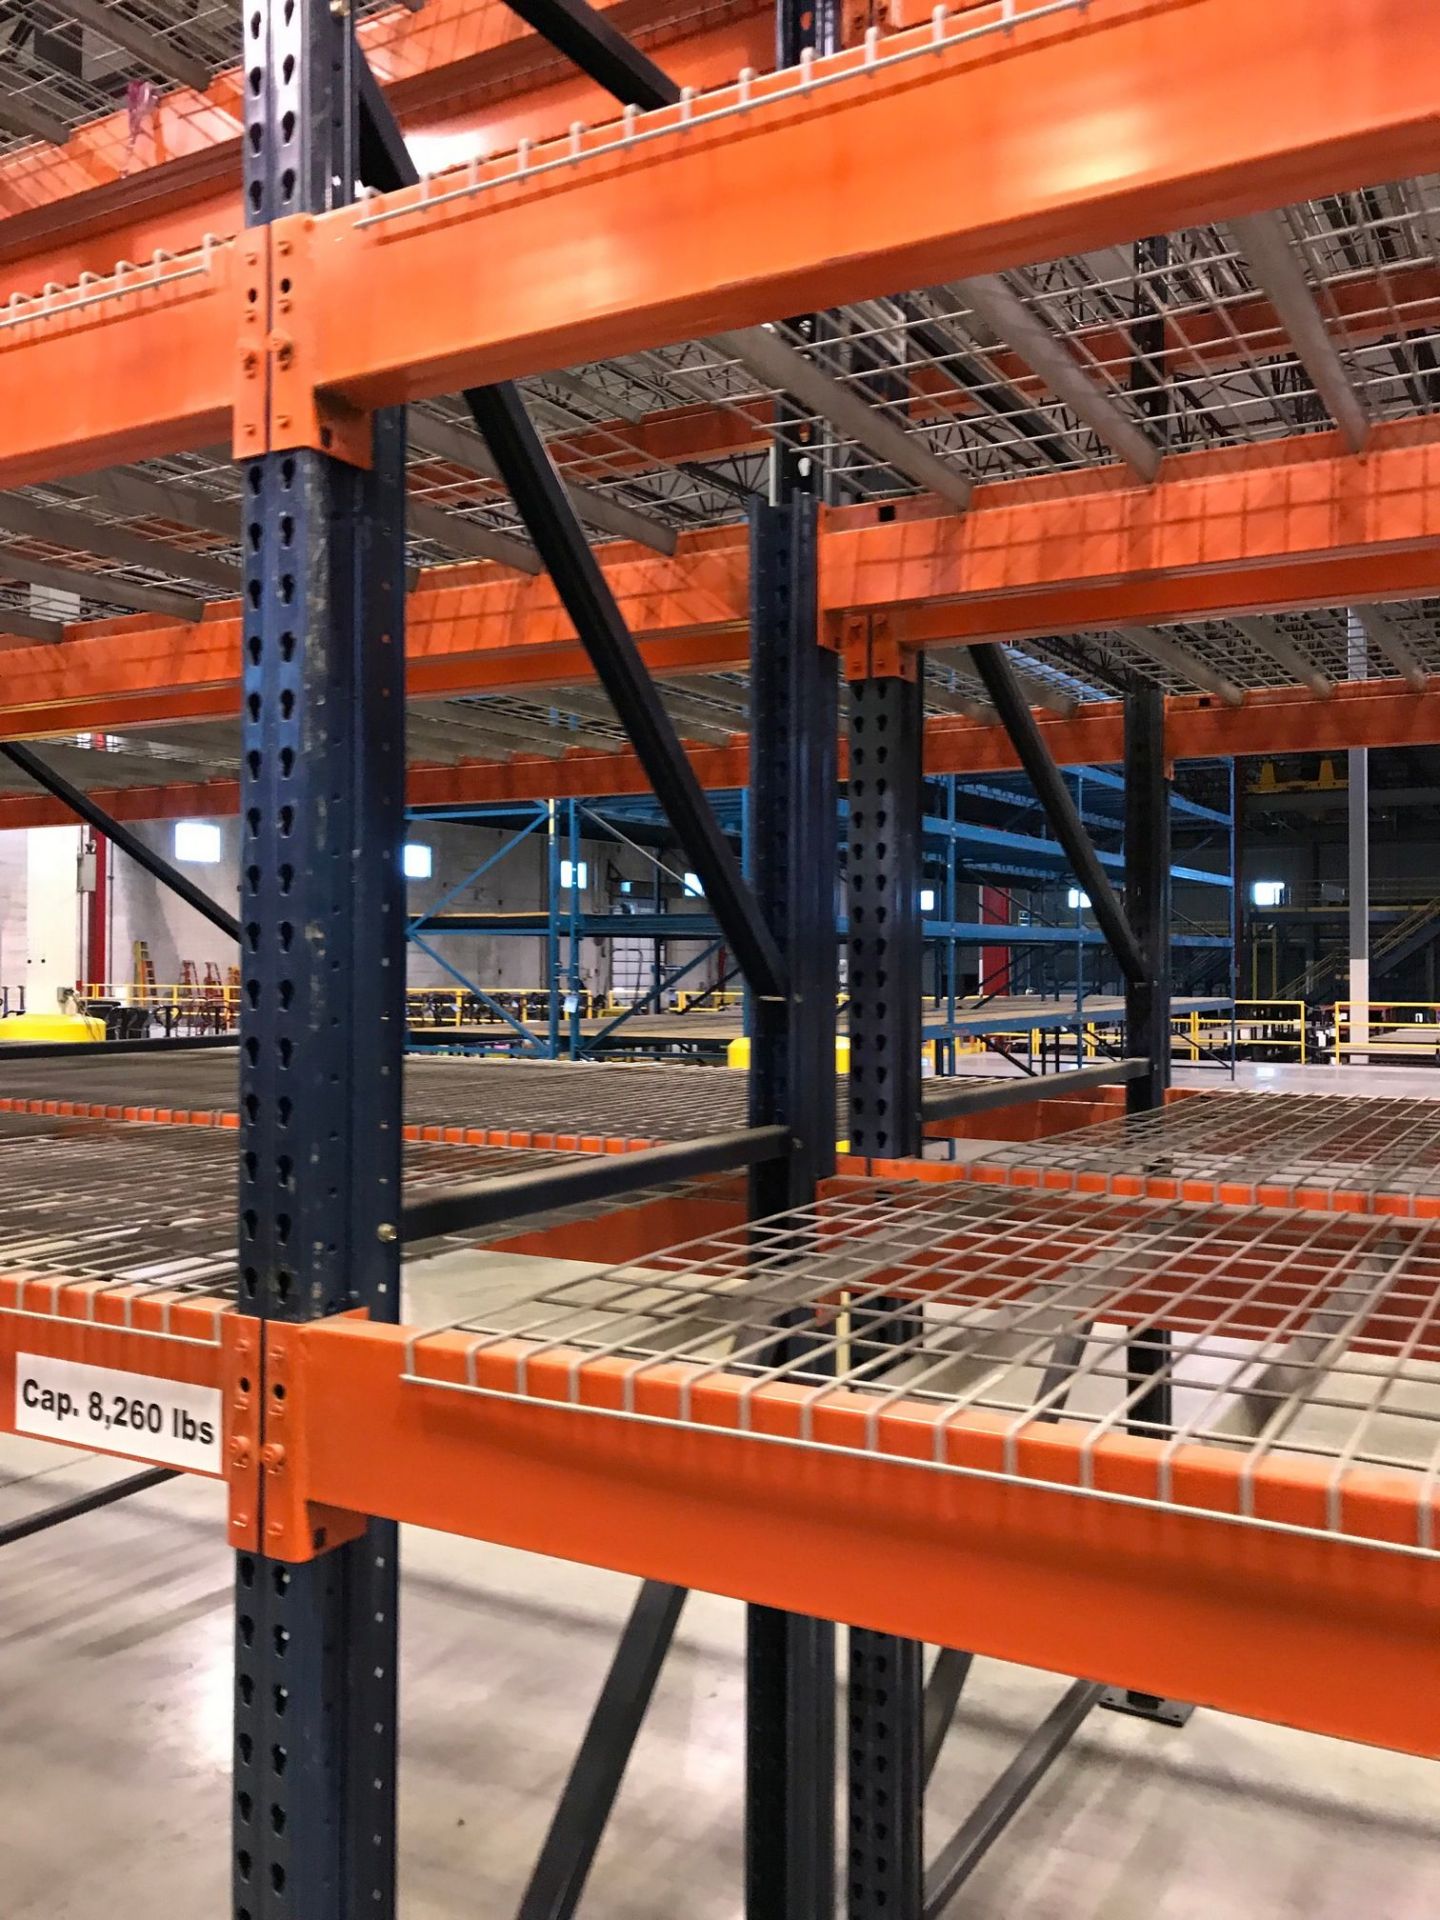 SECTIONS 60" X 108" X 288" TEARDROP TYPE ADJUSTABLE BEAM PALLET RACK WITH WIRE DECKING, 6" HIGH - Image 12 of 13